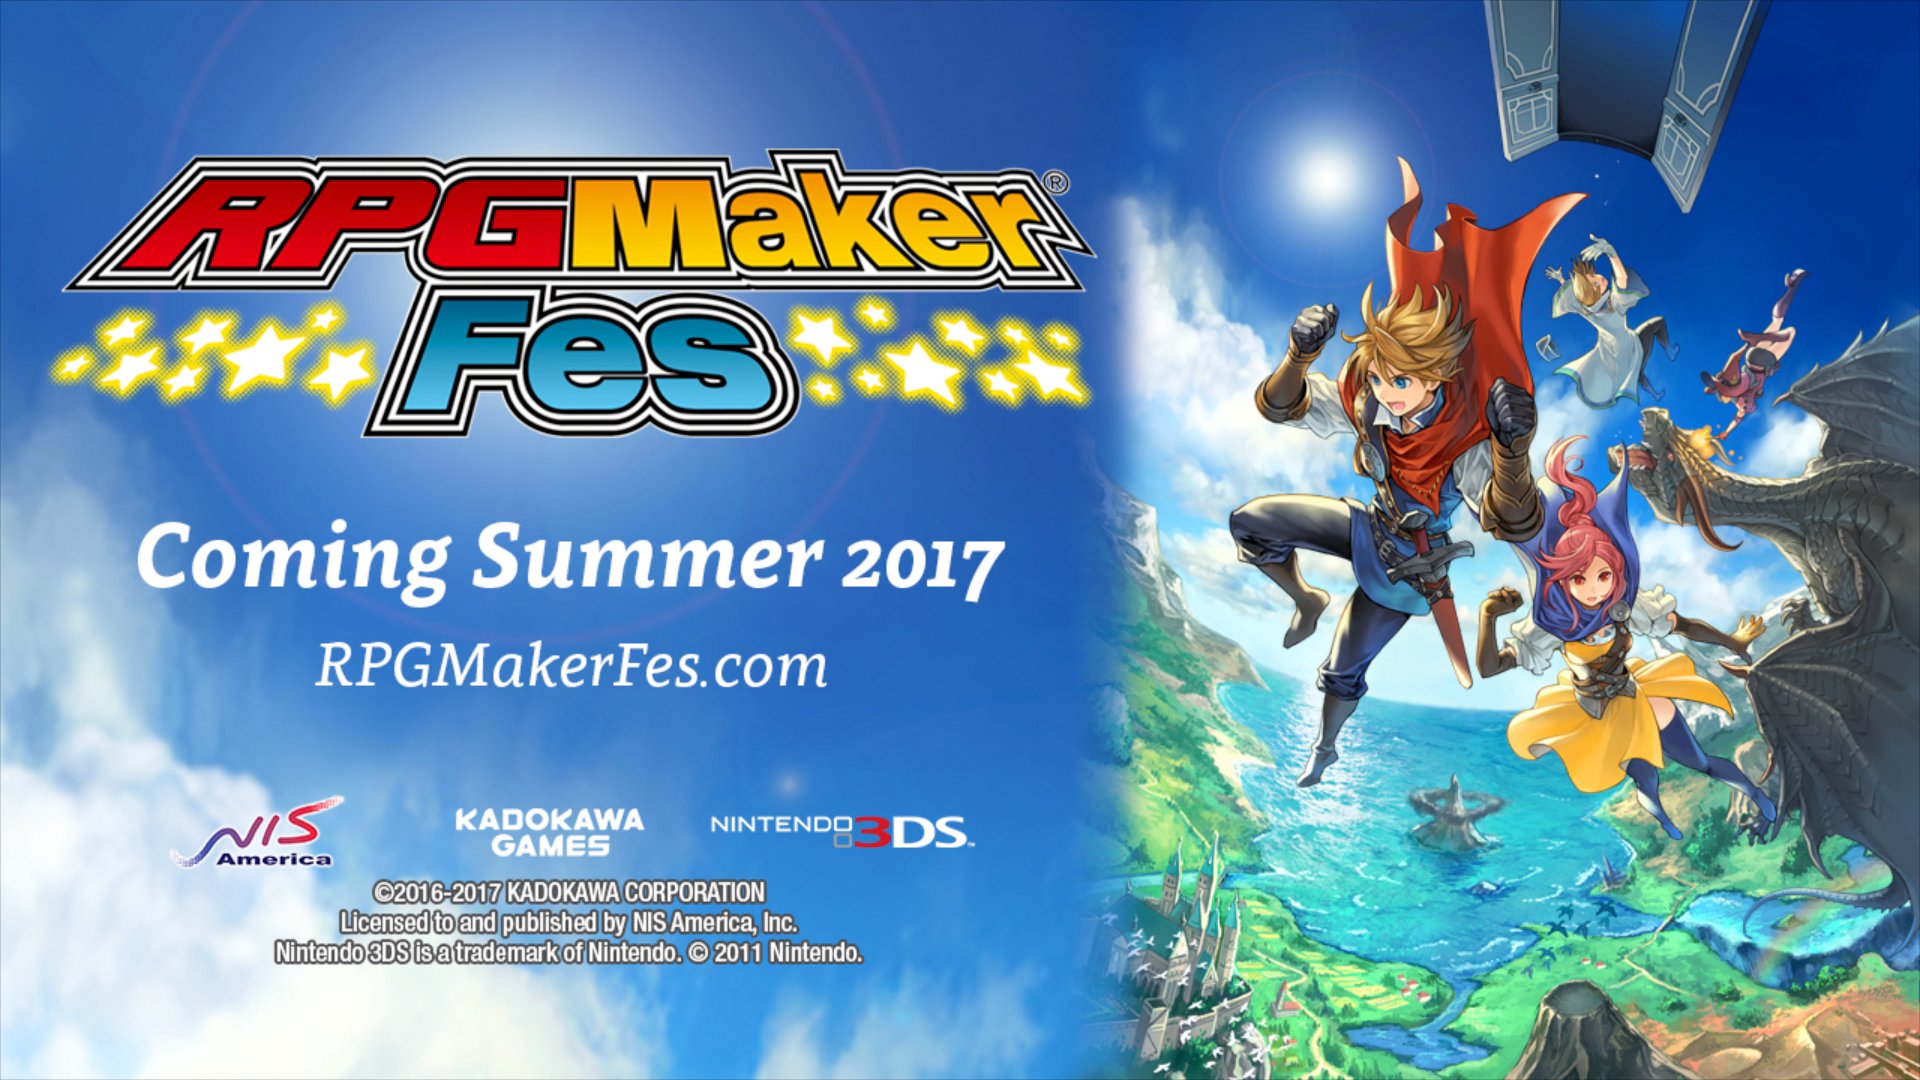 Nintendo of Europe on Twitter: "RPG Maker Fes is coming to Nintendo #3DS summer 2017! any RPG you can imagine! https://t.co/LsK09wXlsb" / Twitter